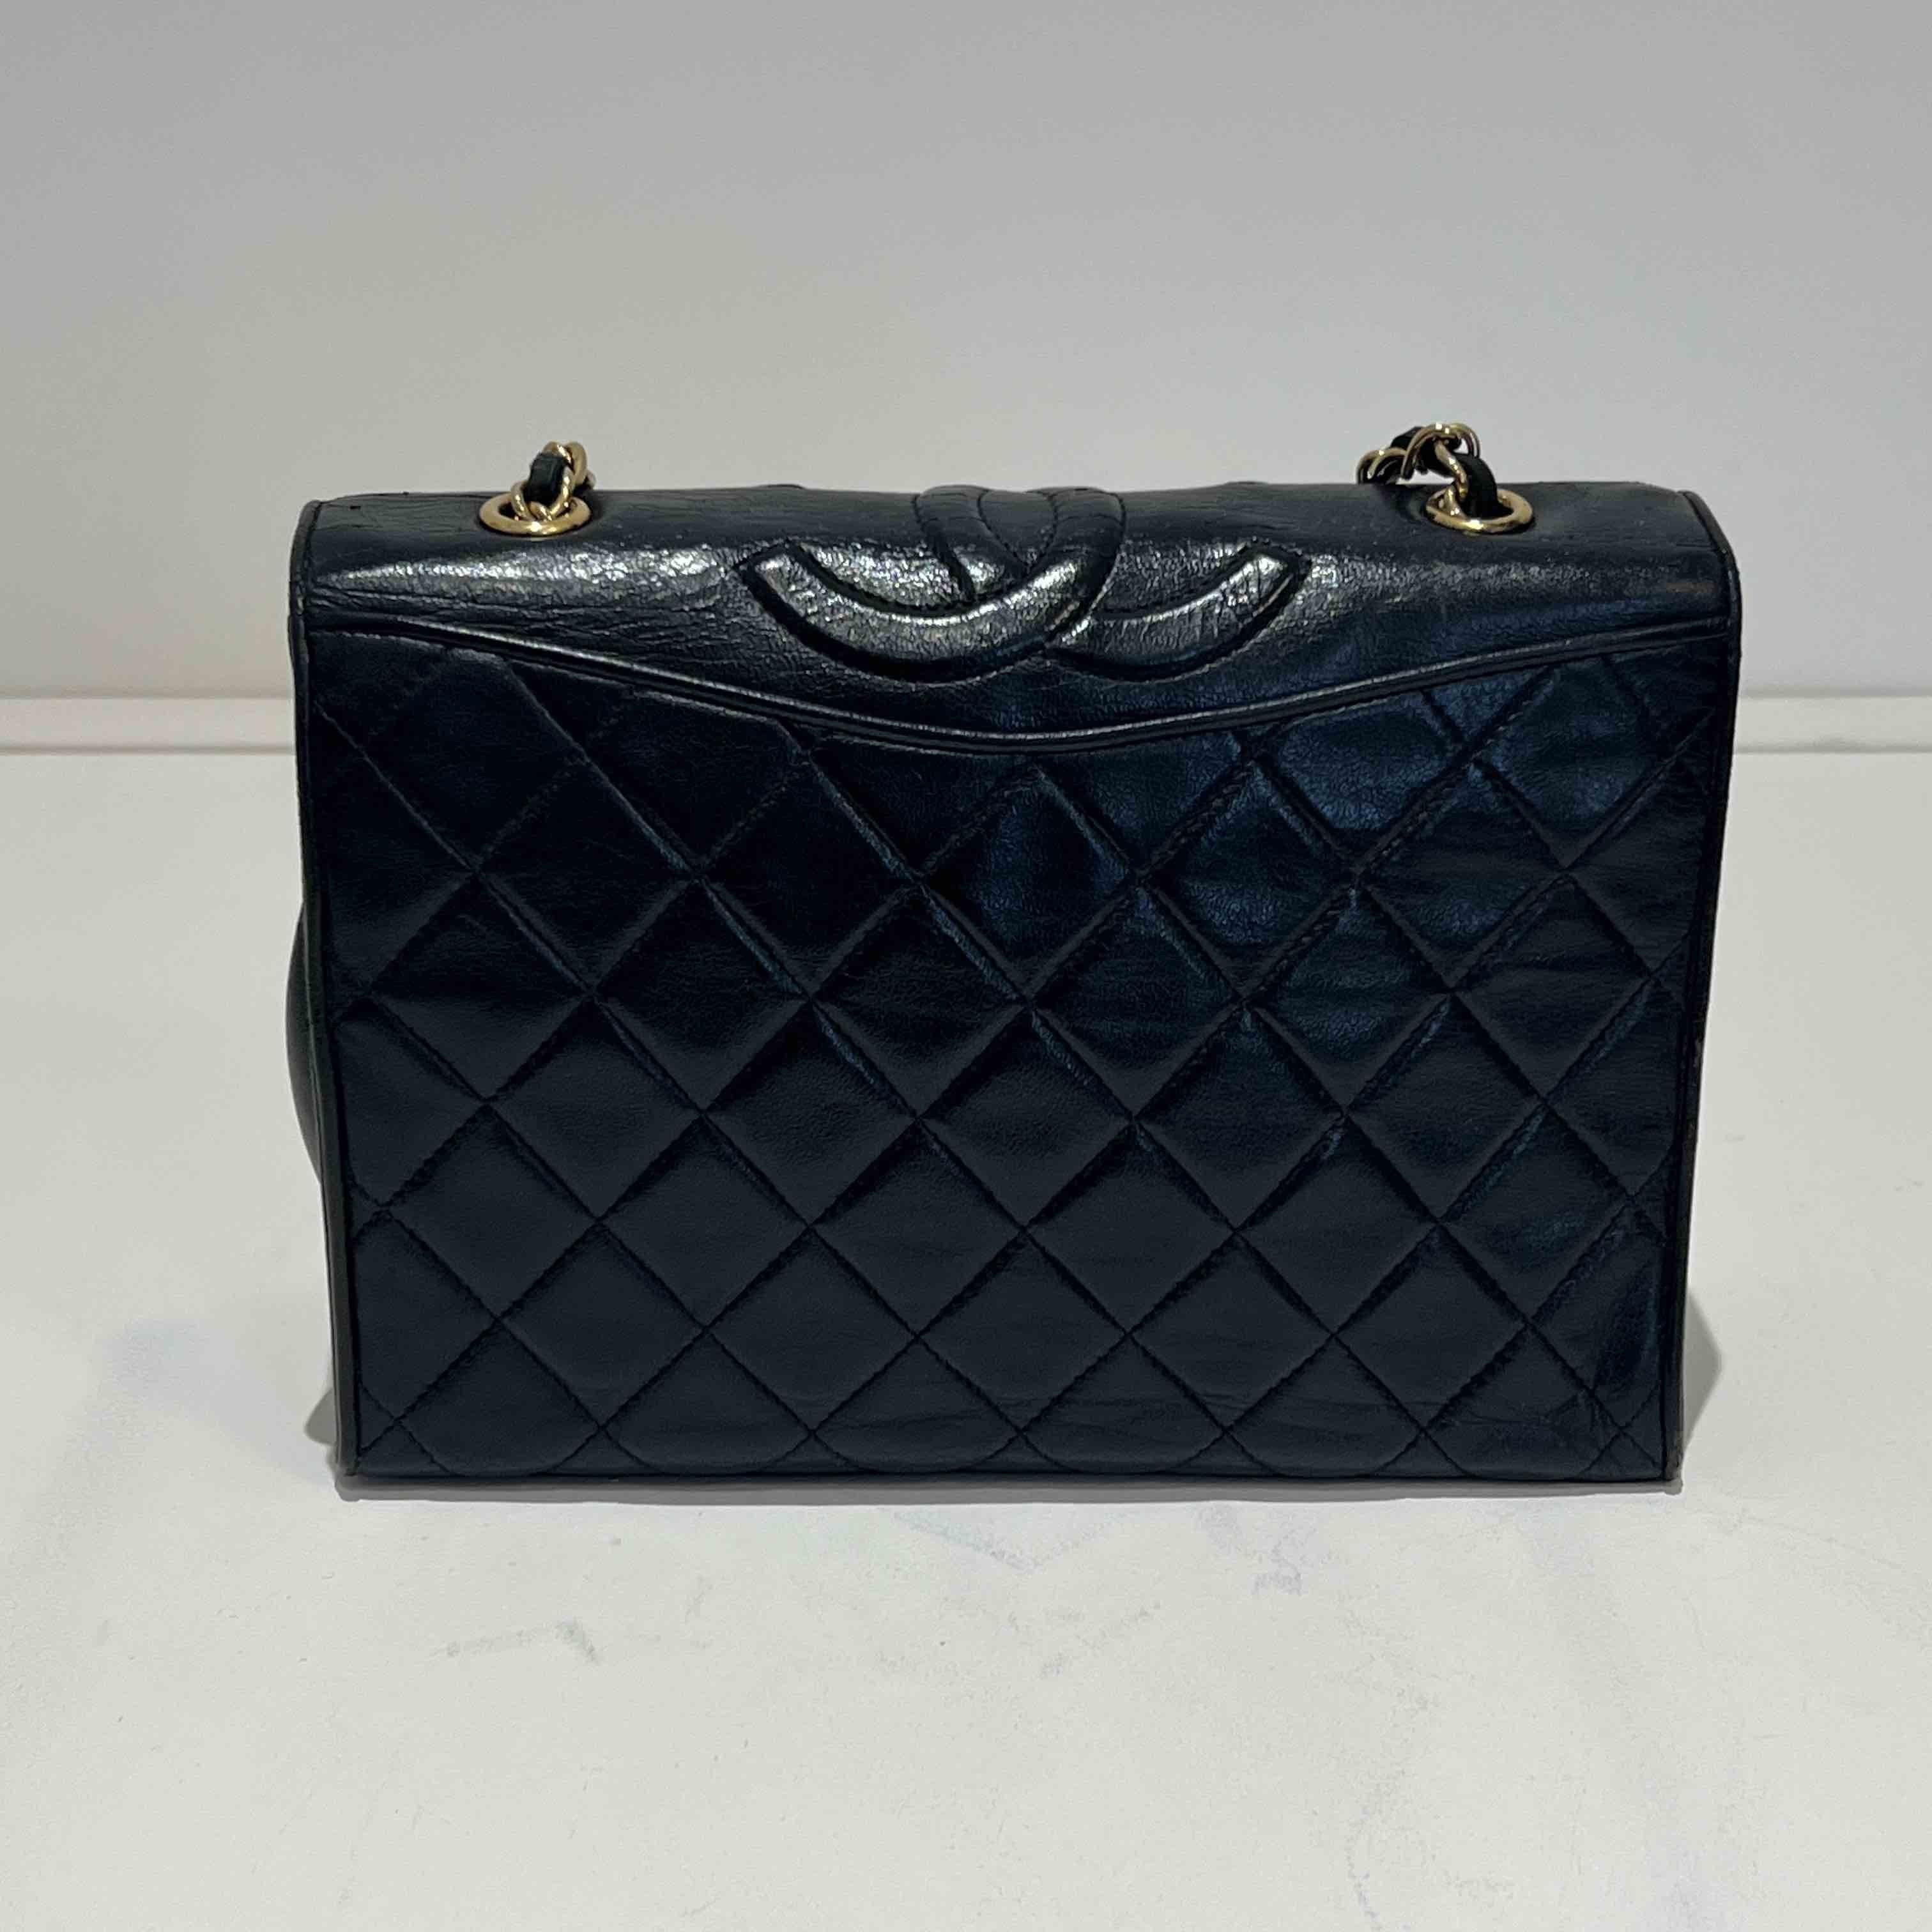 CHANEL Vintage Timeless Bag in Black Leather In Good Condition For Sale In Paris, FR